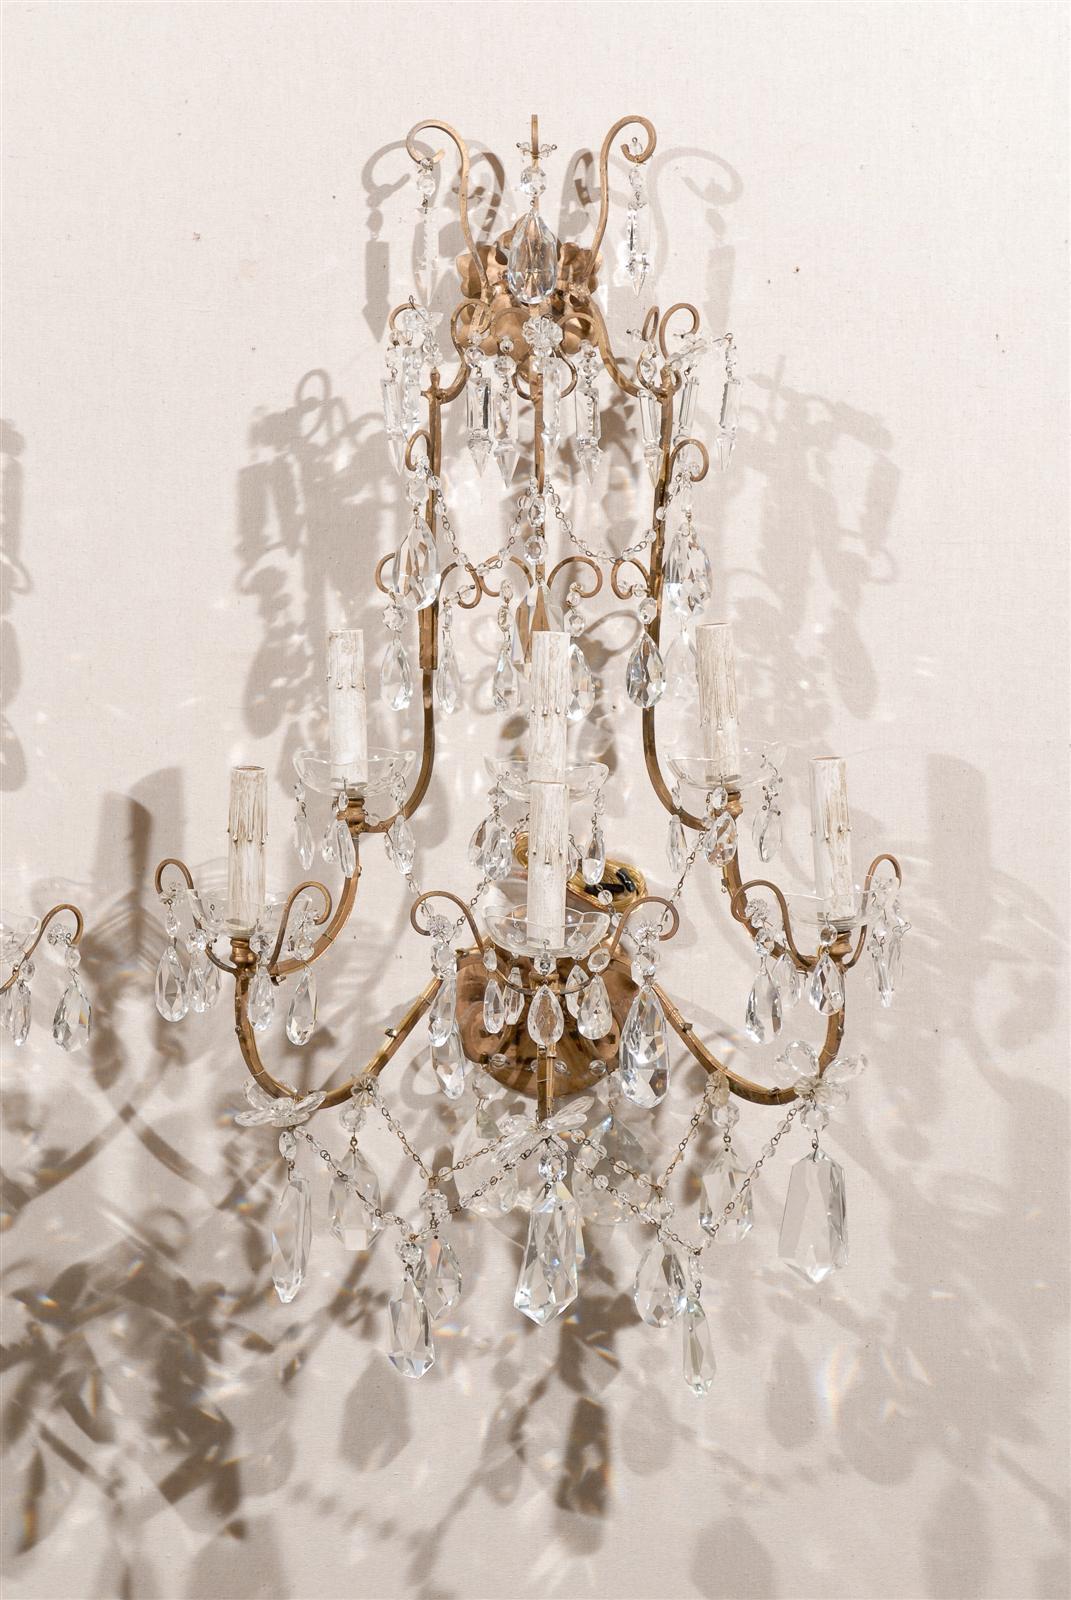 20th Century A Pair of Italian Crystal Six-Light Sconces with Beautiful Draping Ornamentation